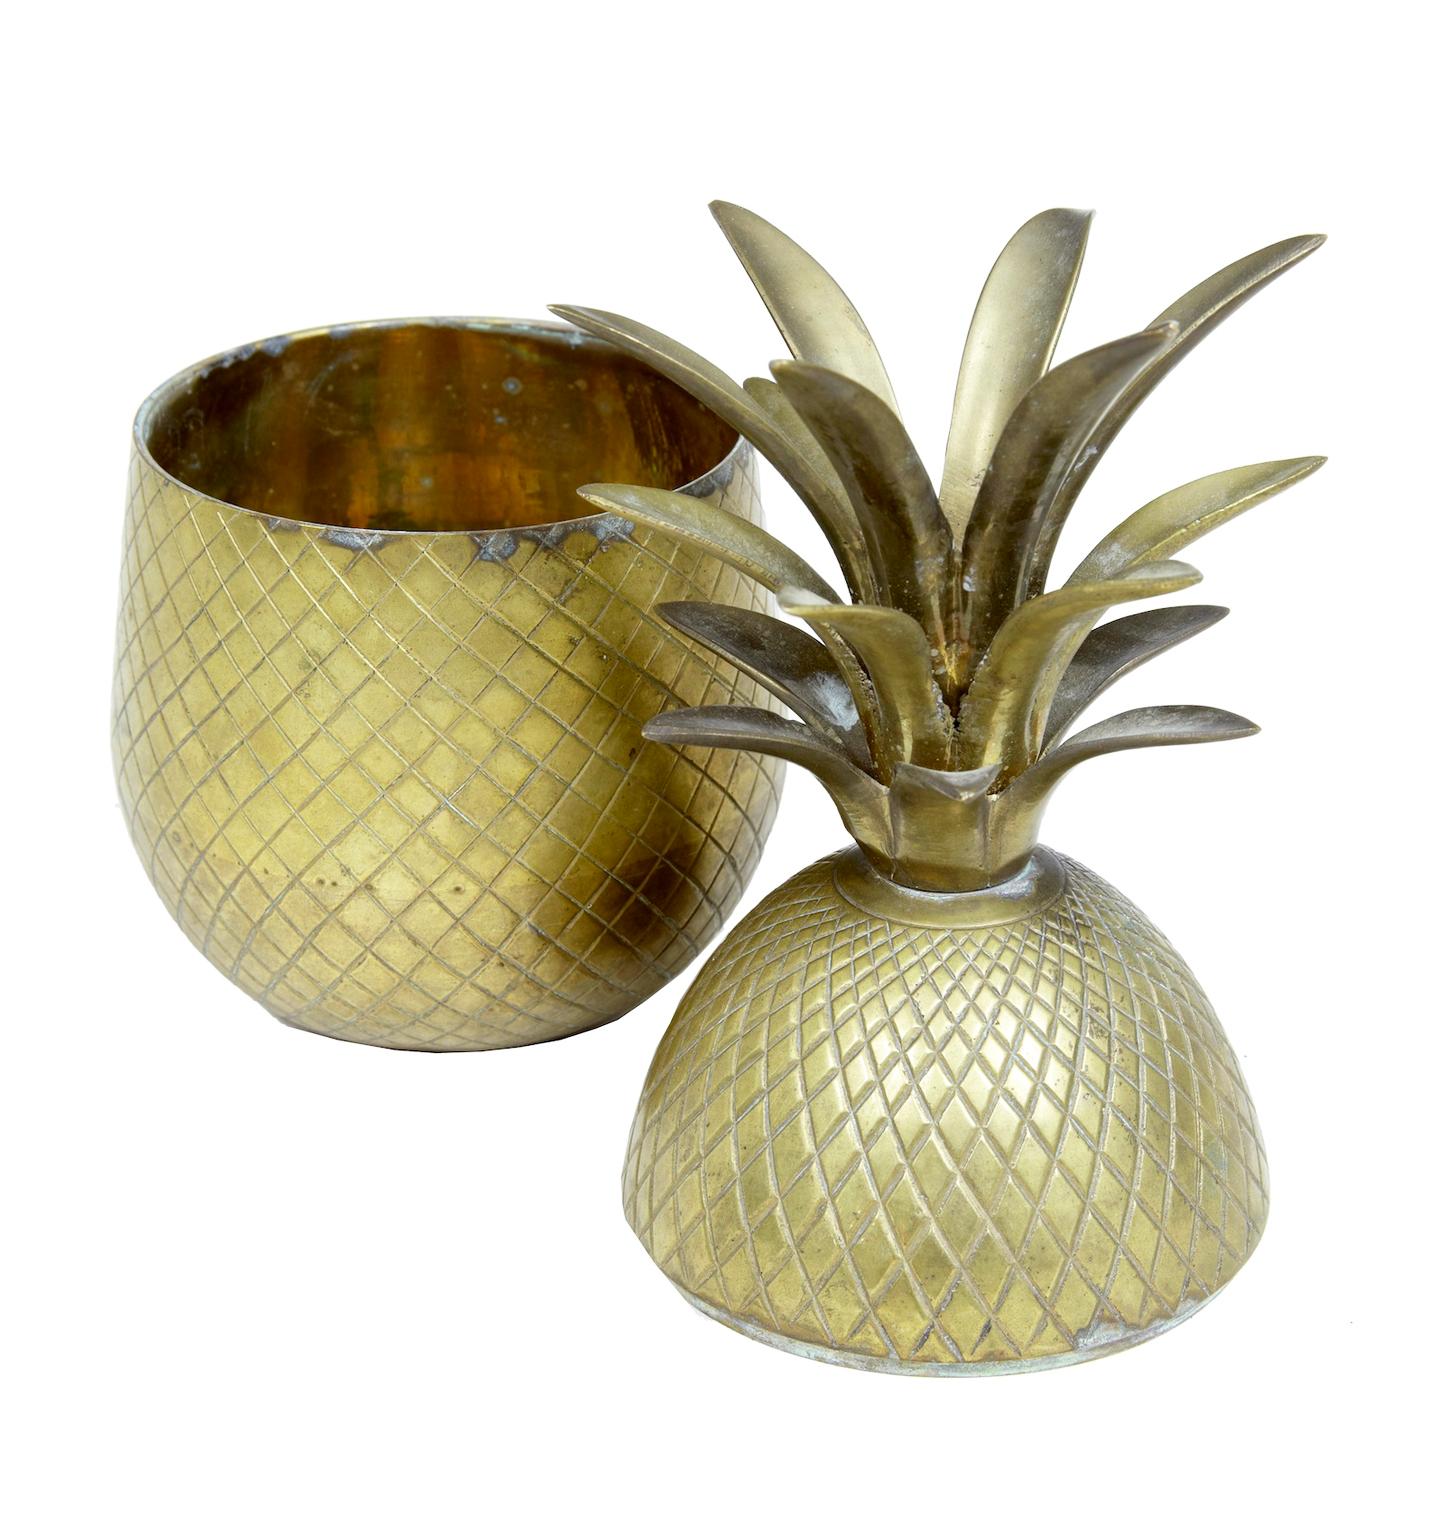 Early 20th century chiselled brass and gilt pineapple box caddy, circa 1900.

Good quality decorative piece used for storage in the form of a pineapple. Splits in half to reveal a gilded interior.

Minor surface marks to outside.